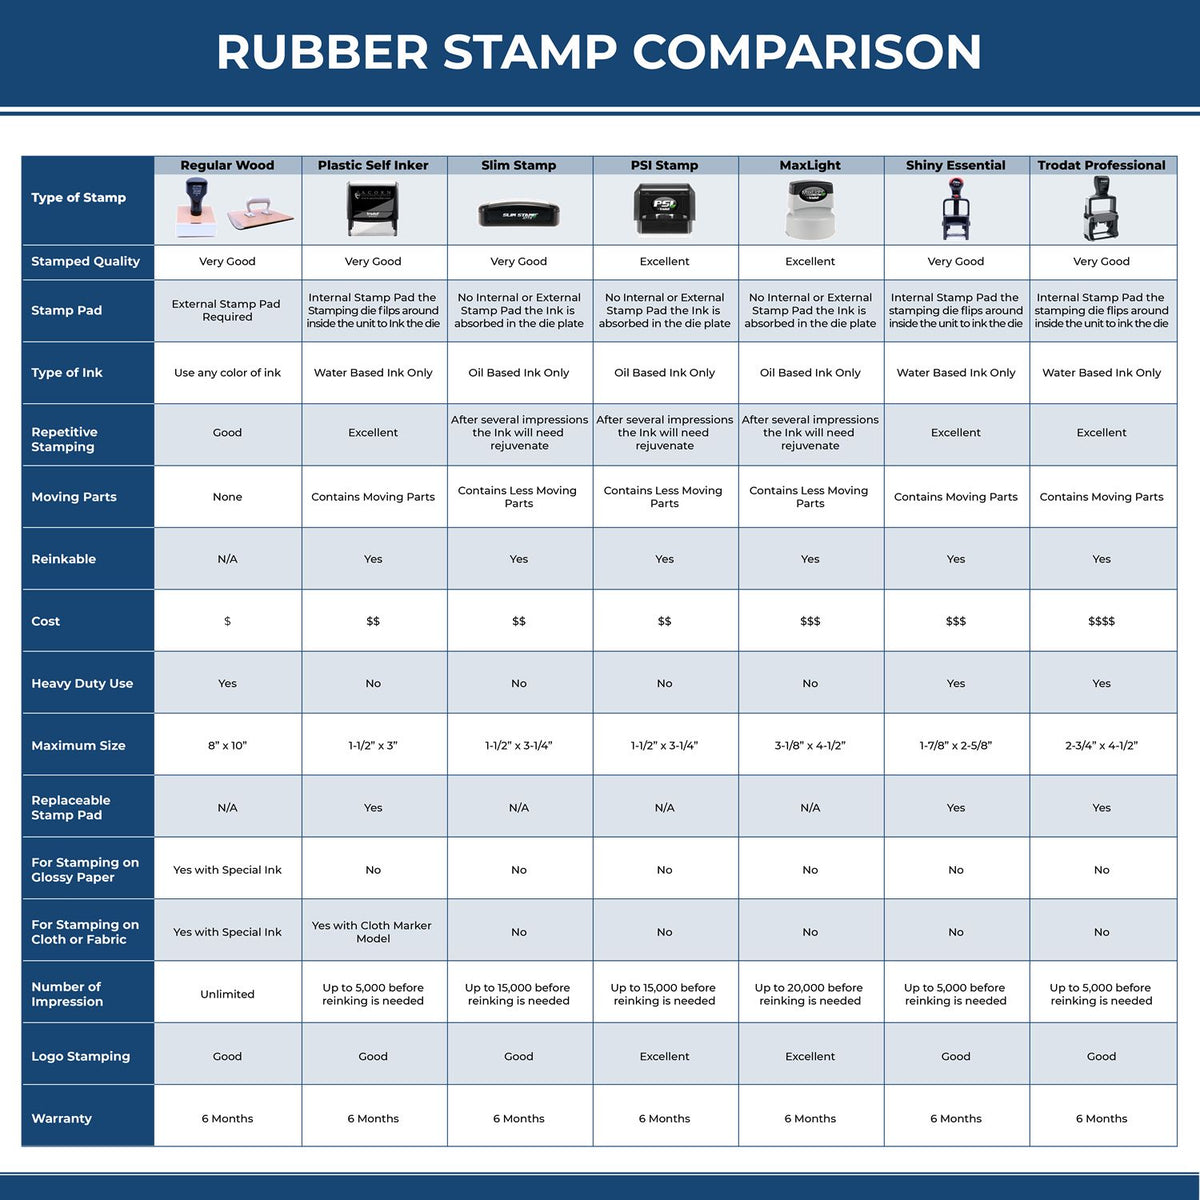 Lowercase For Deposit Only Rubber Stamp 4404R Rubber Stamp Comparison